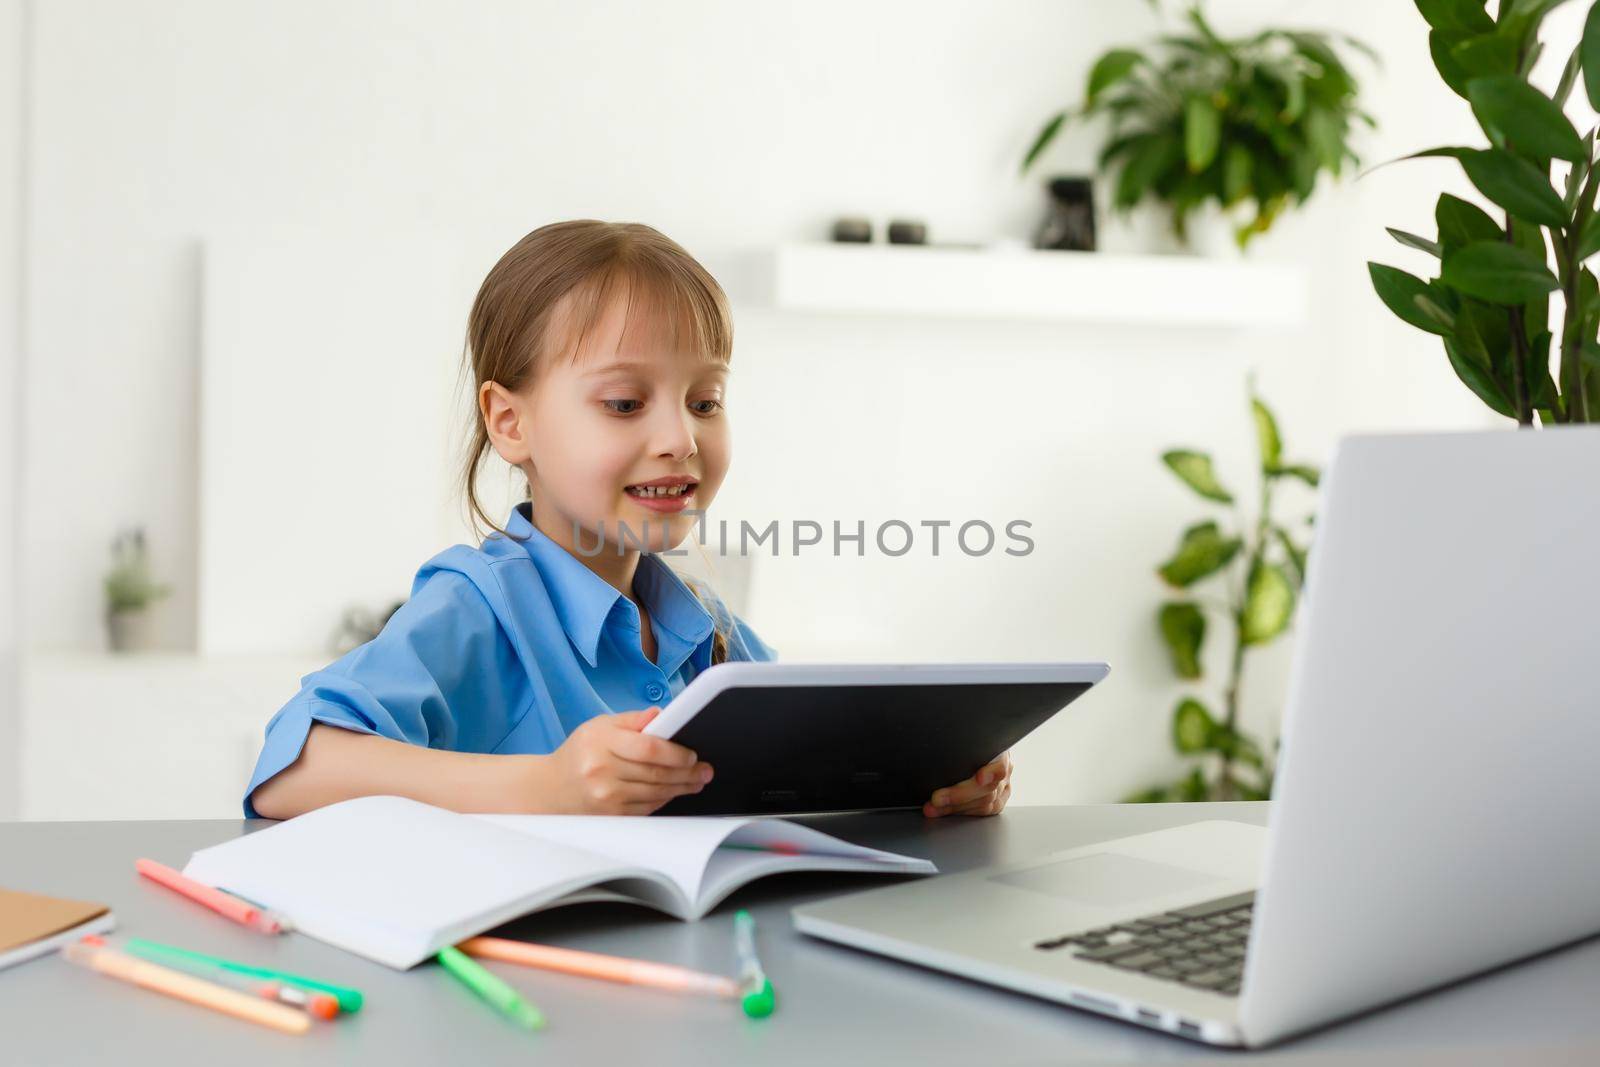 Remote lessons. The child smiles happily and gets knowledge remotely. Little girl study online learning from home. Online school.